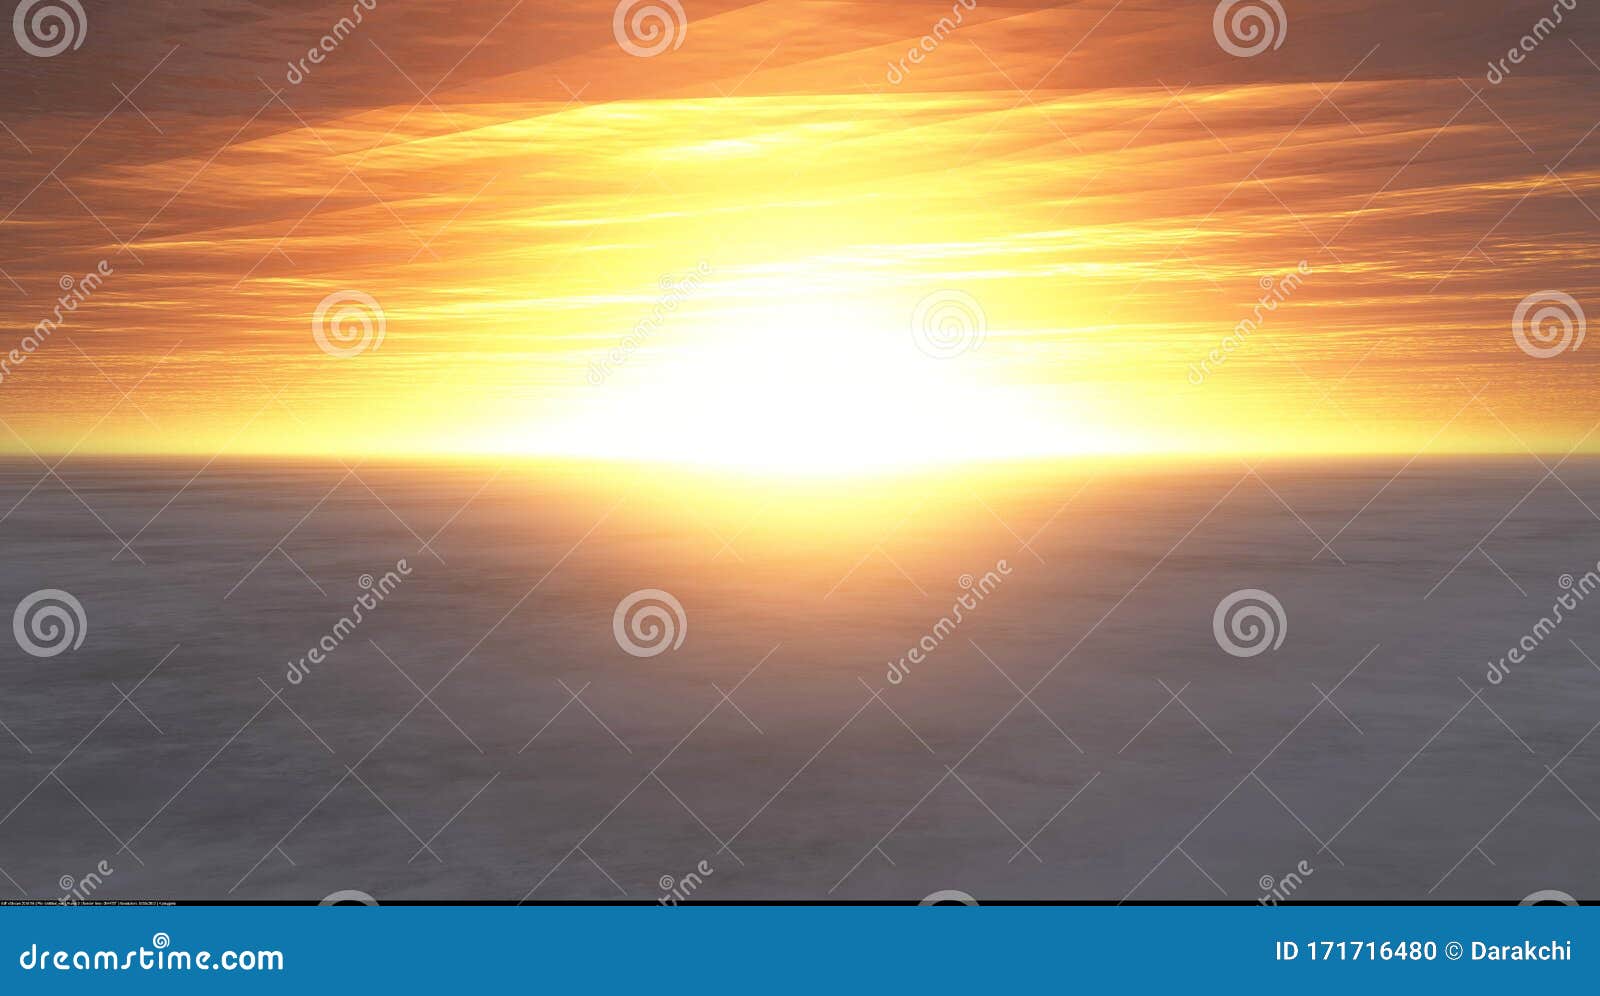 HD wallpaper The Rising Sun sunrise ocean morning 3d and abstract   Wallpaper Flare